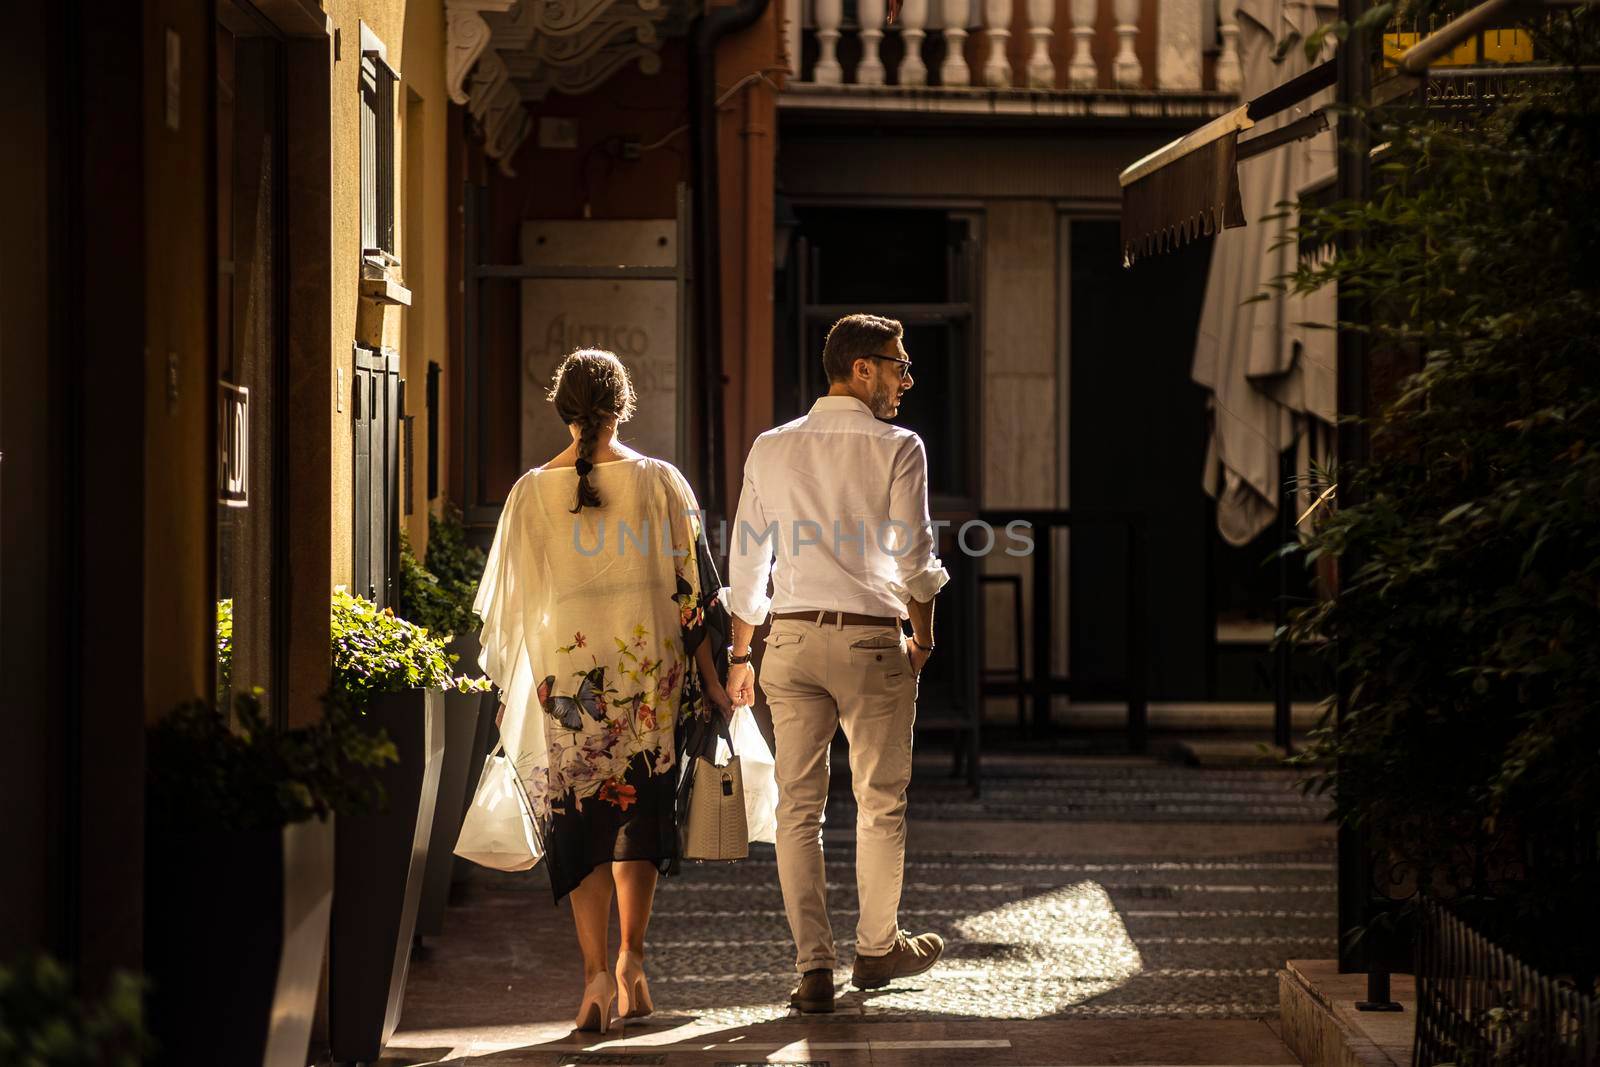 Couple goes shopping in Italian historic city boutiques by pippocarlot